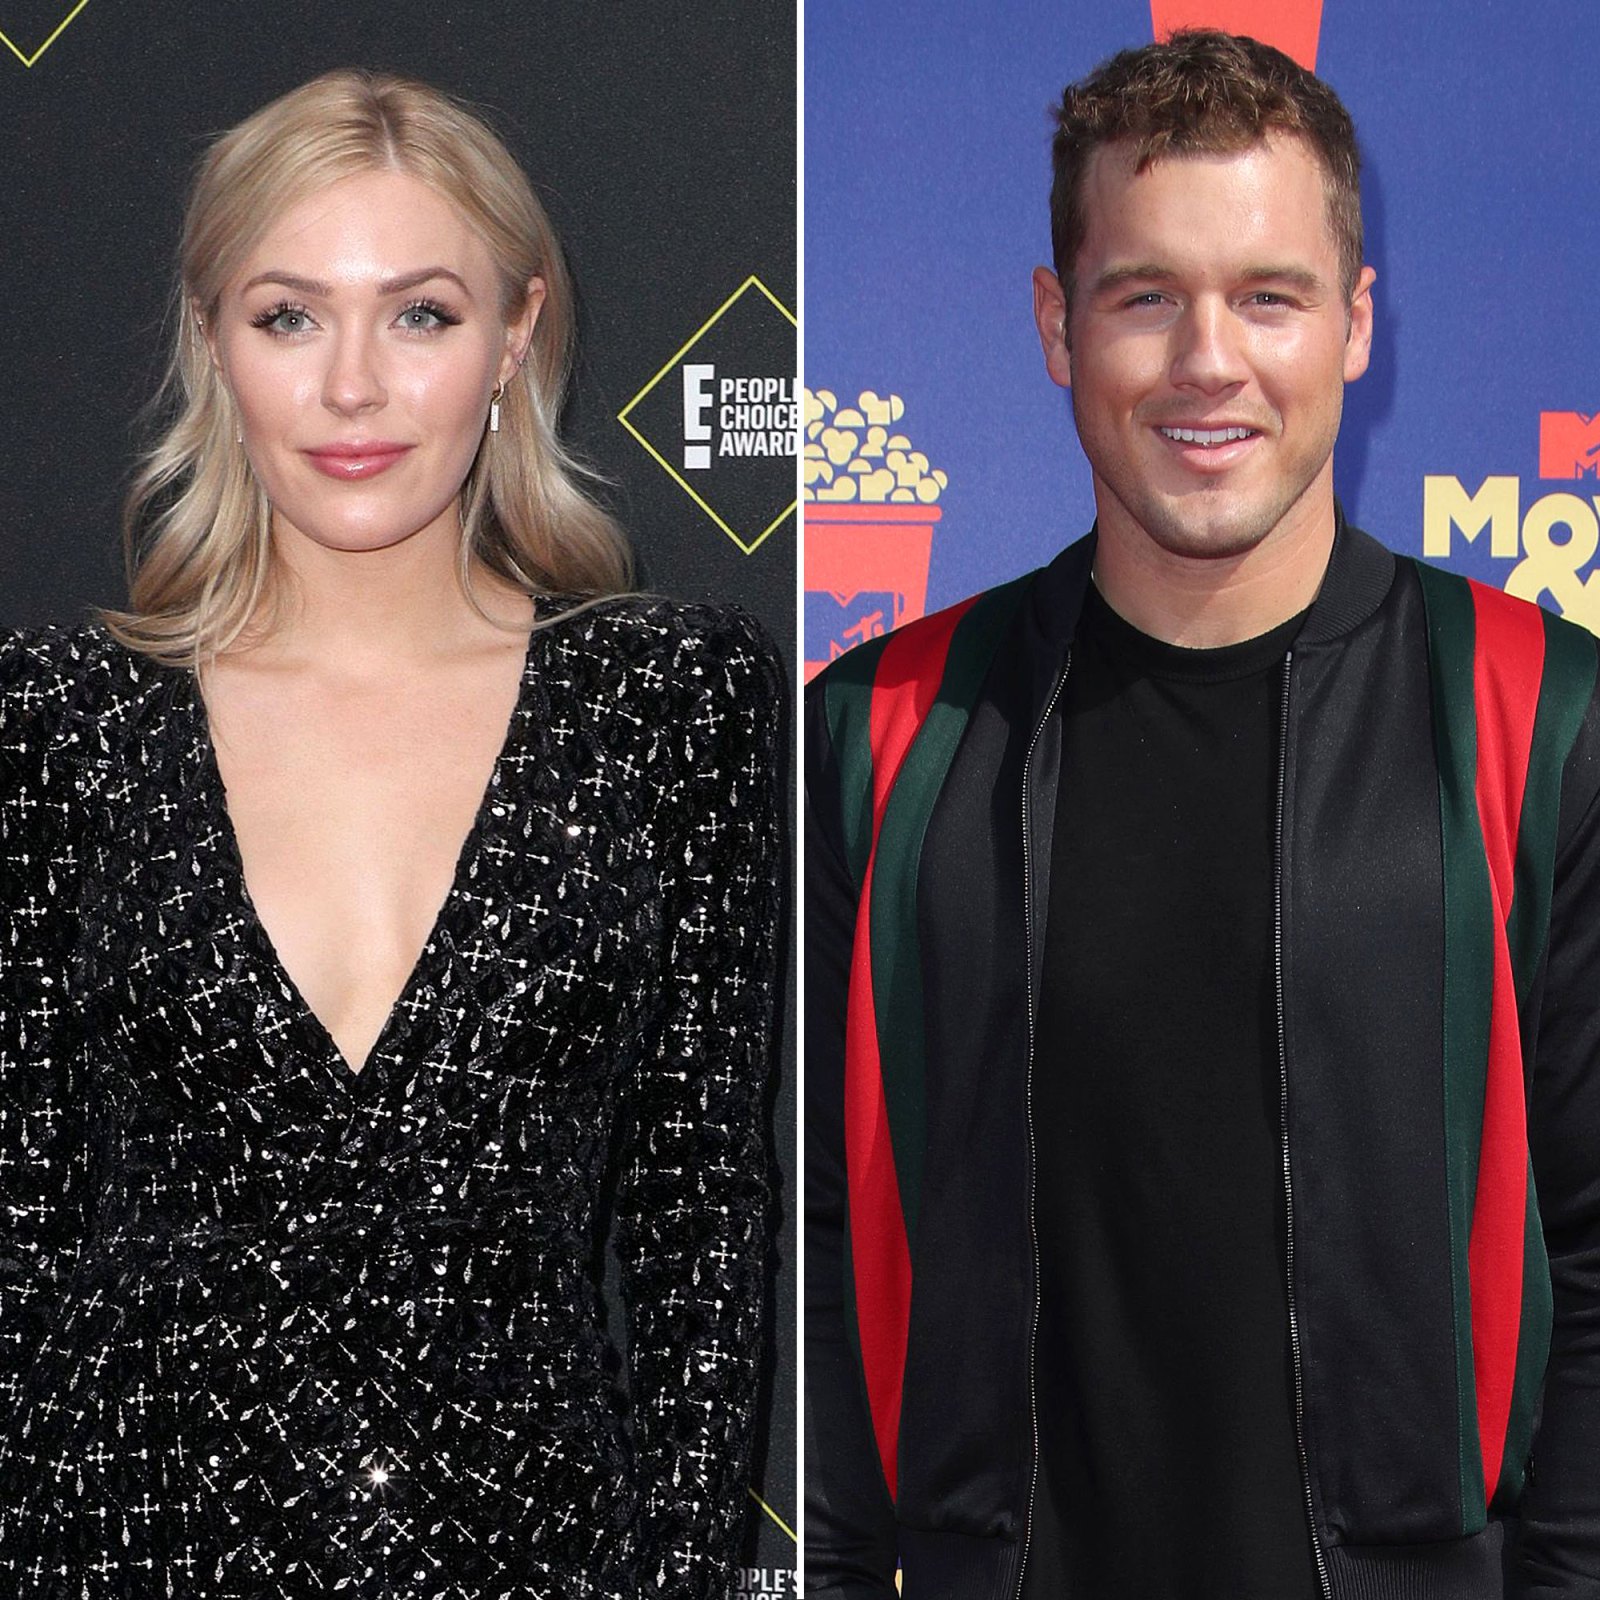 Colton Underwood and Cassie Randolph The Way They Were